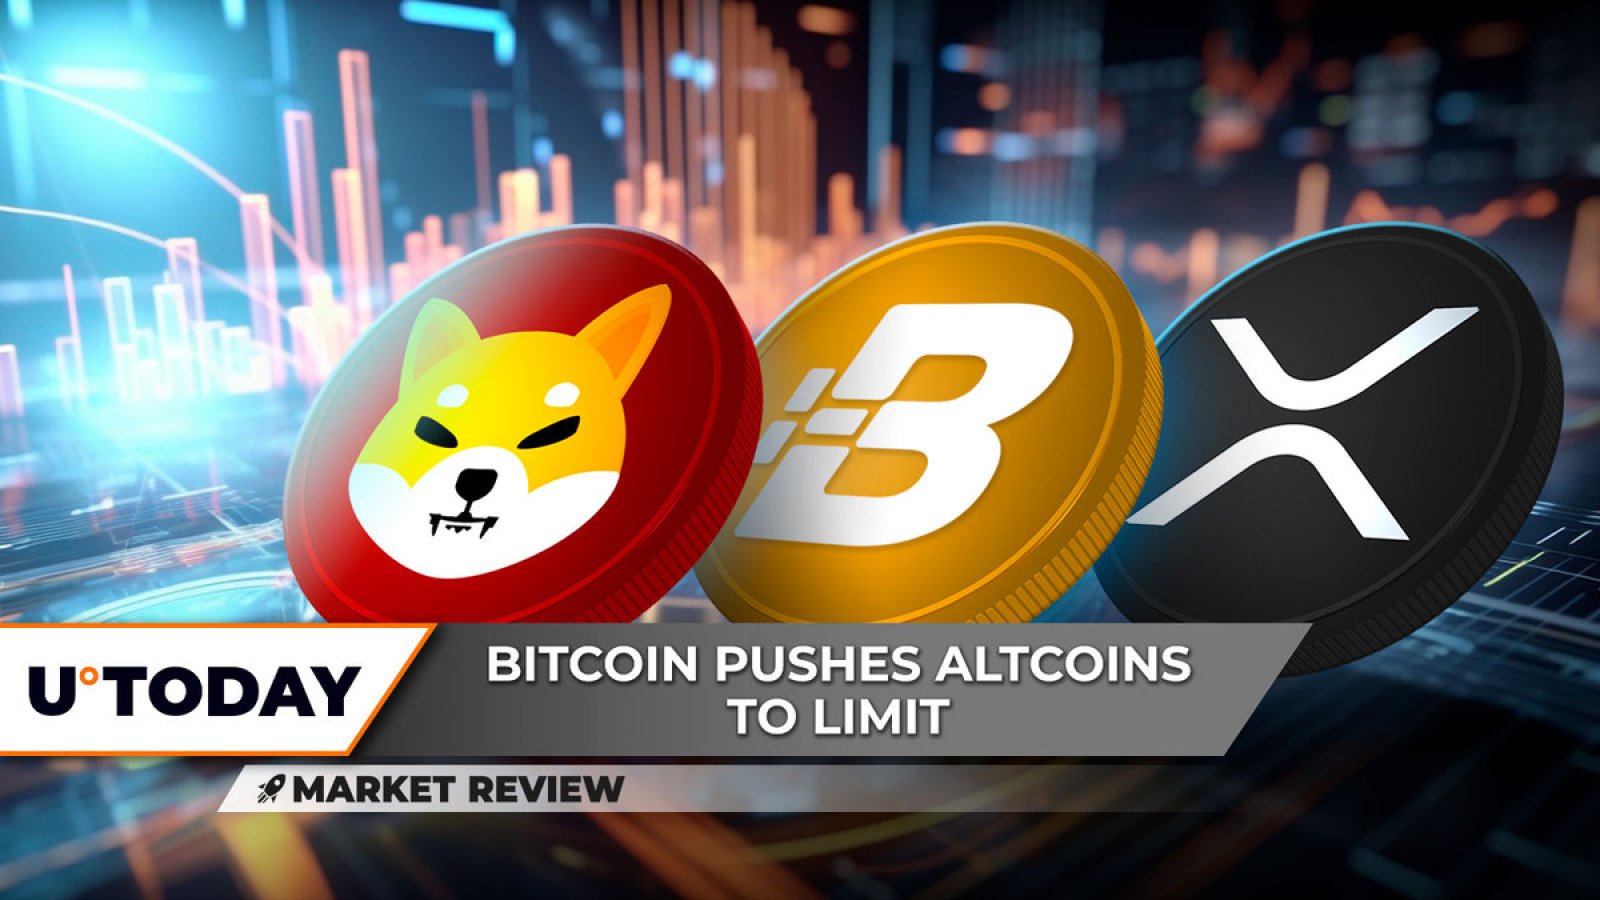 Bitcoin (BTC) on its way to $70,000, Shiba Inu (SHIB) fends off trouble, XRP hits crucial resistance level